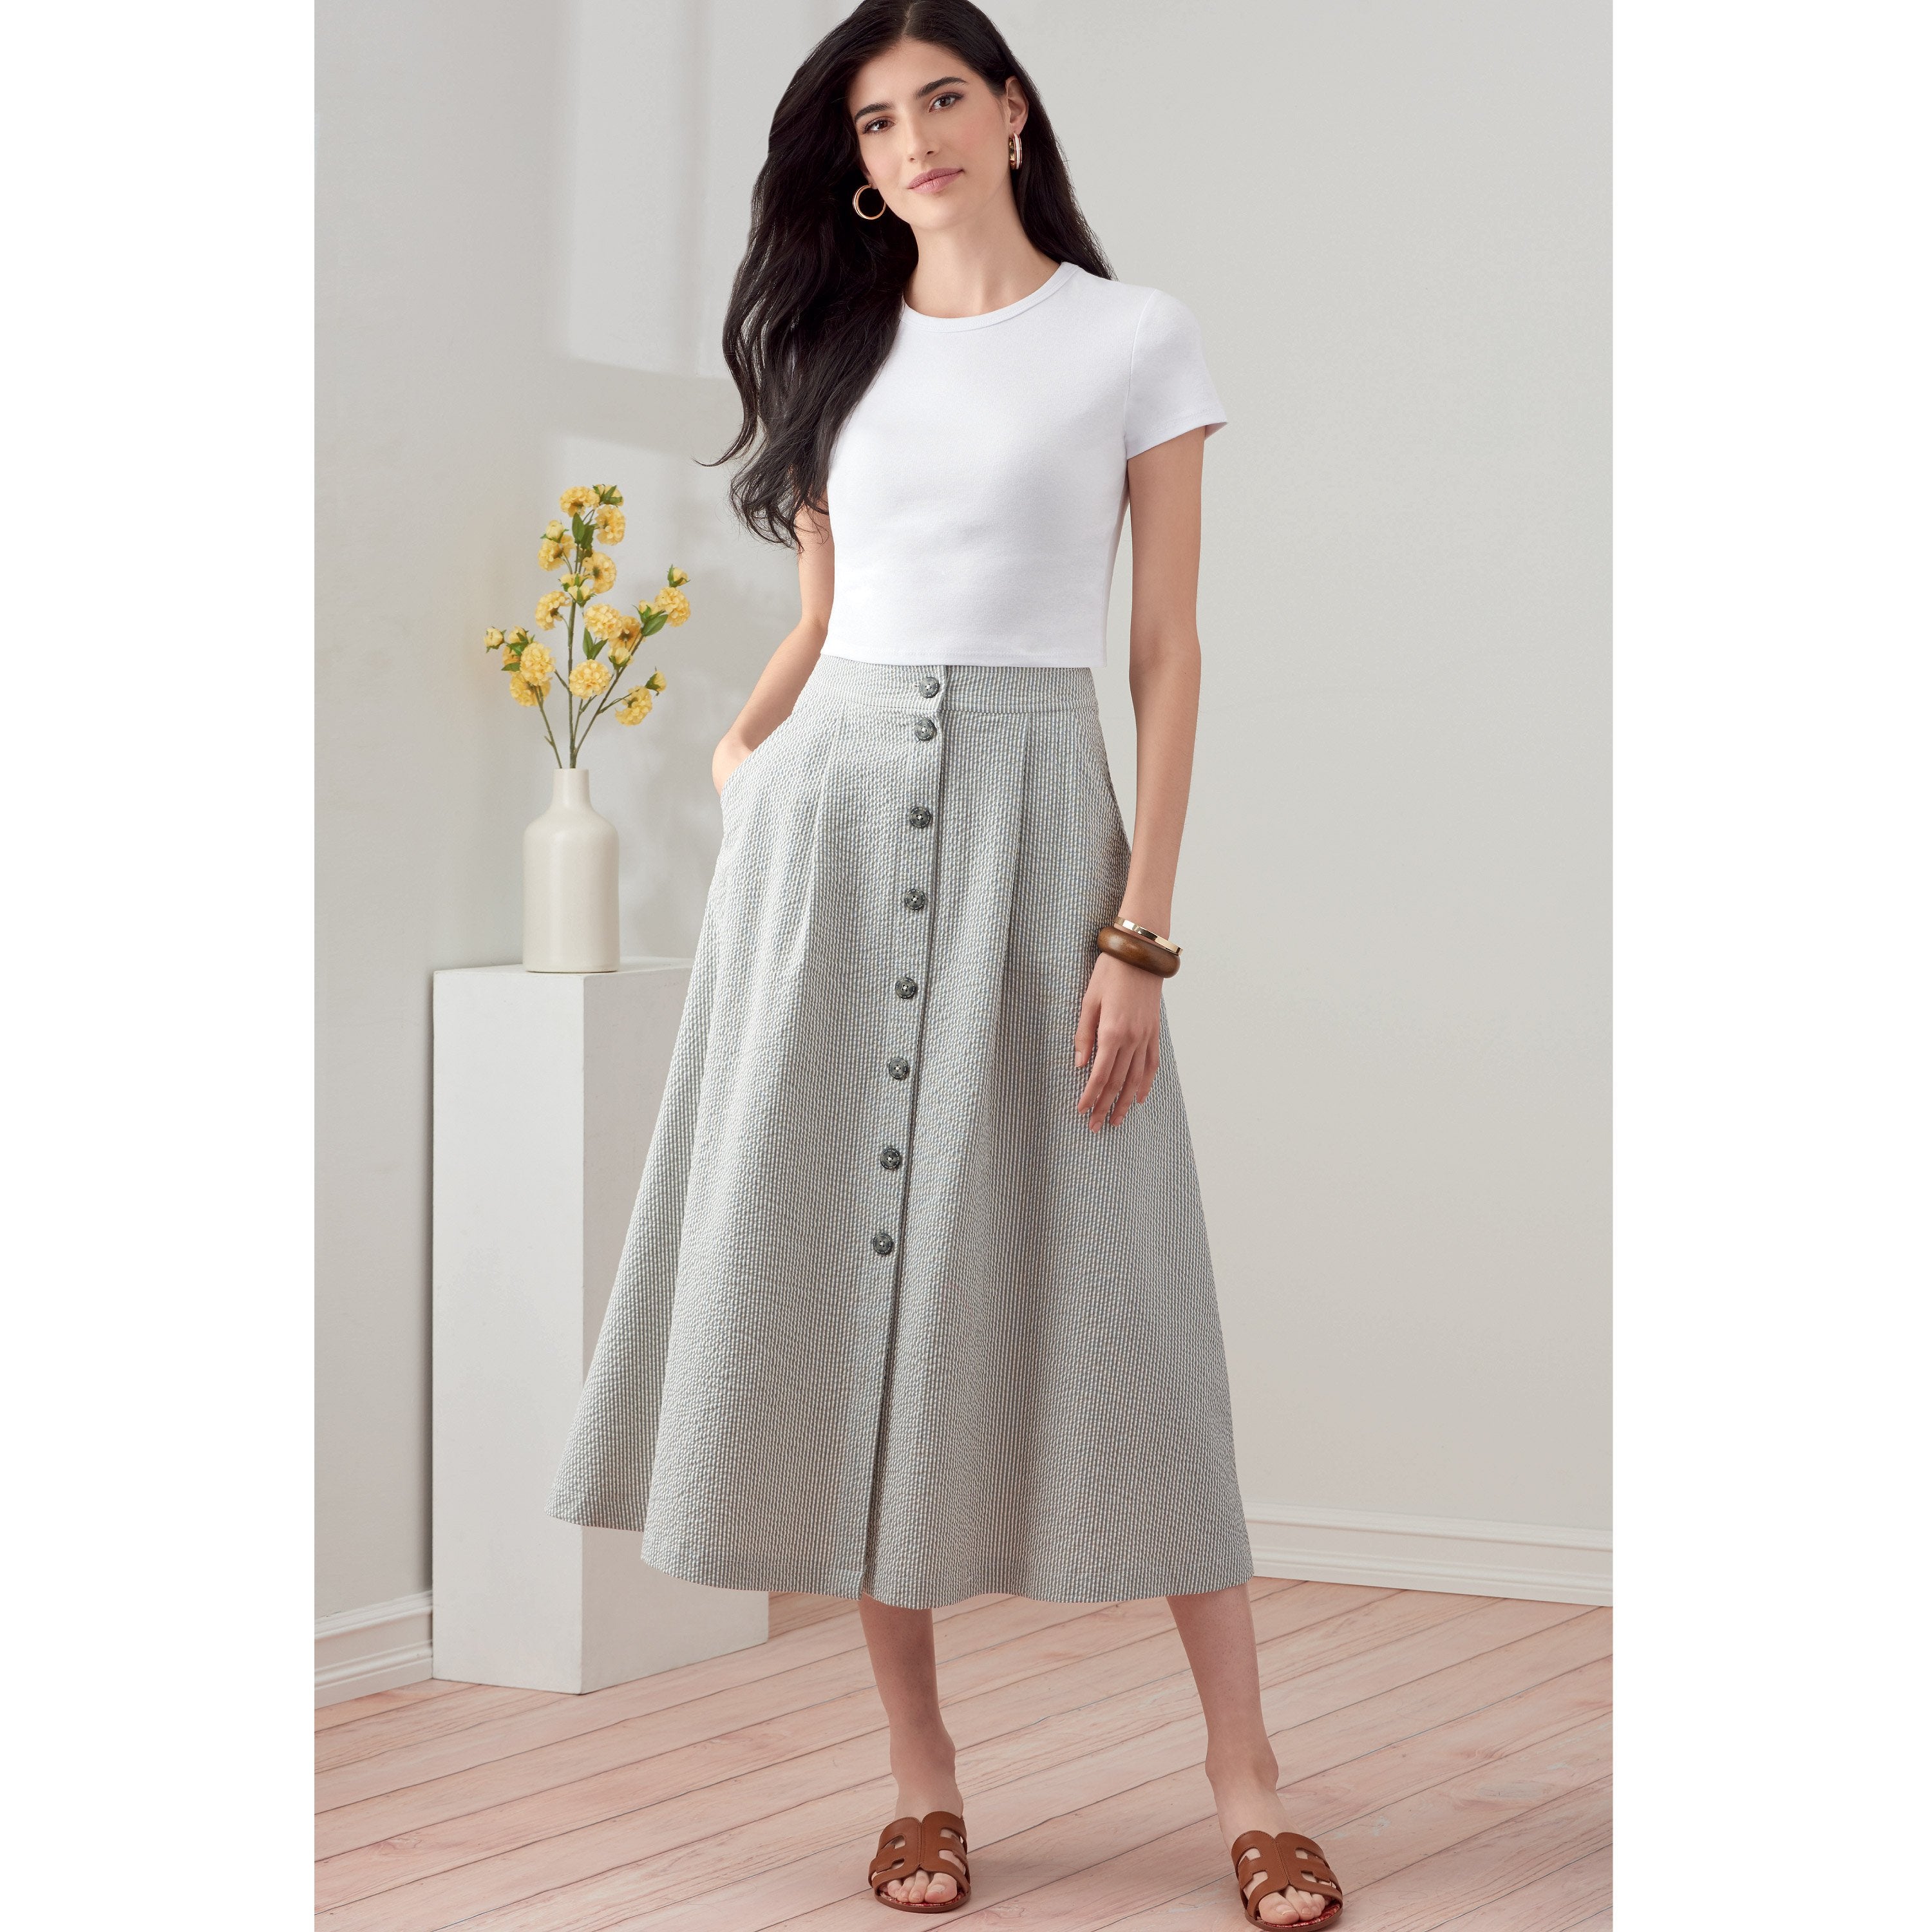 Womens Basic A Line Skirt Sewing Patterns  Be Brave and Bloom